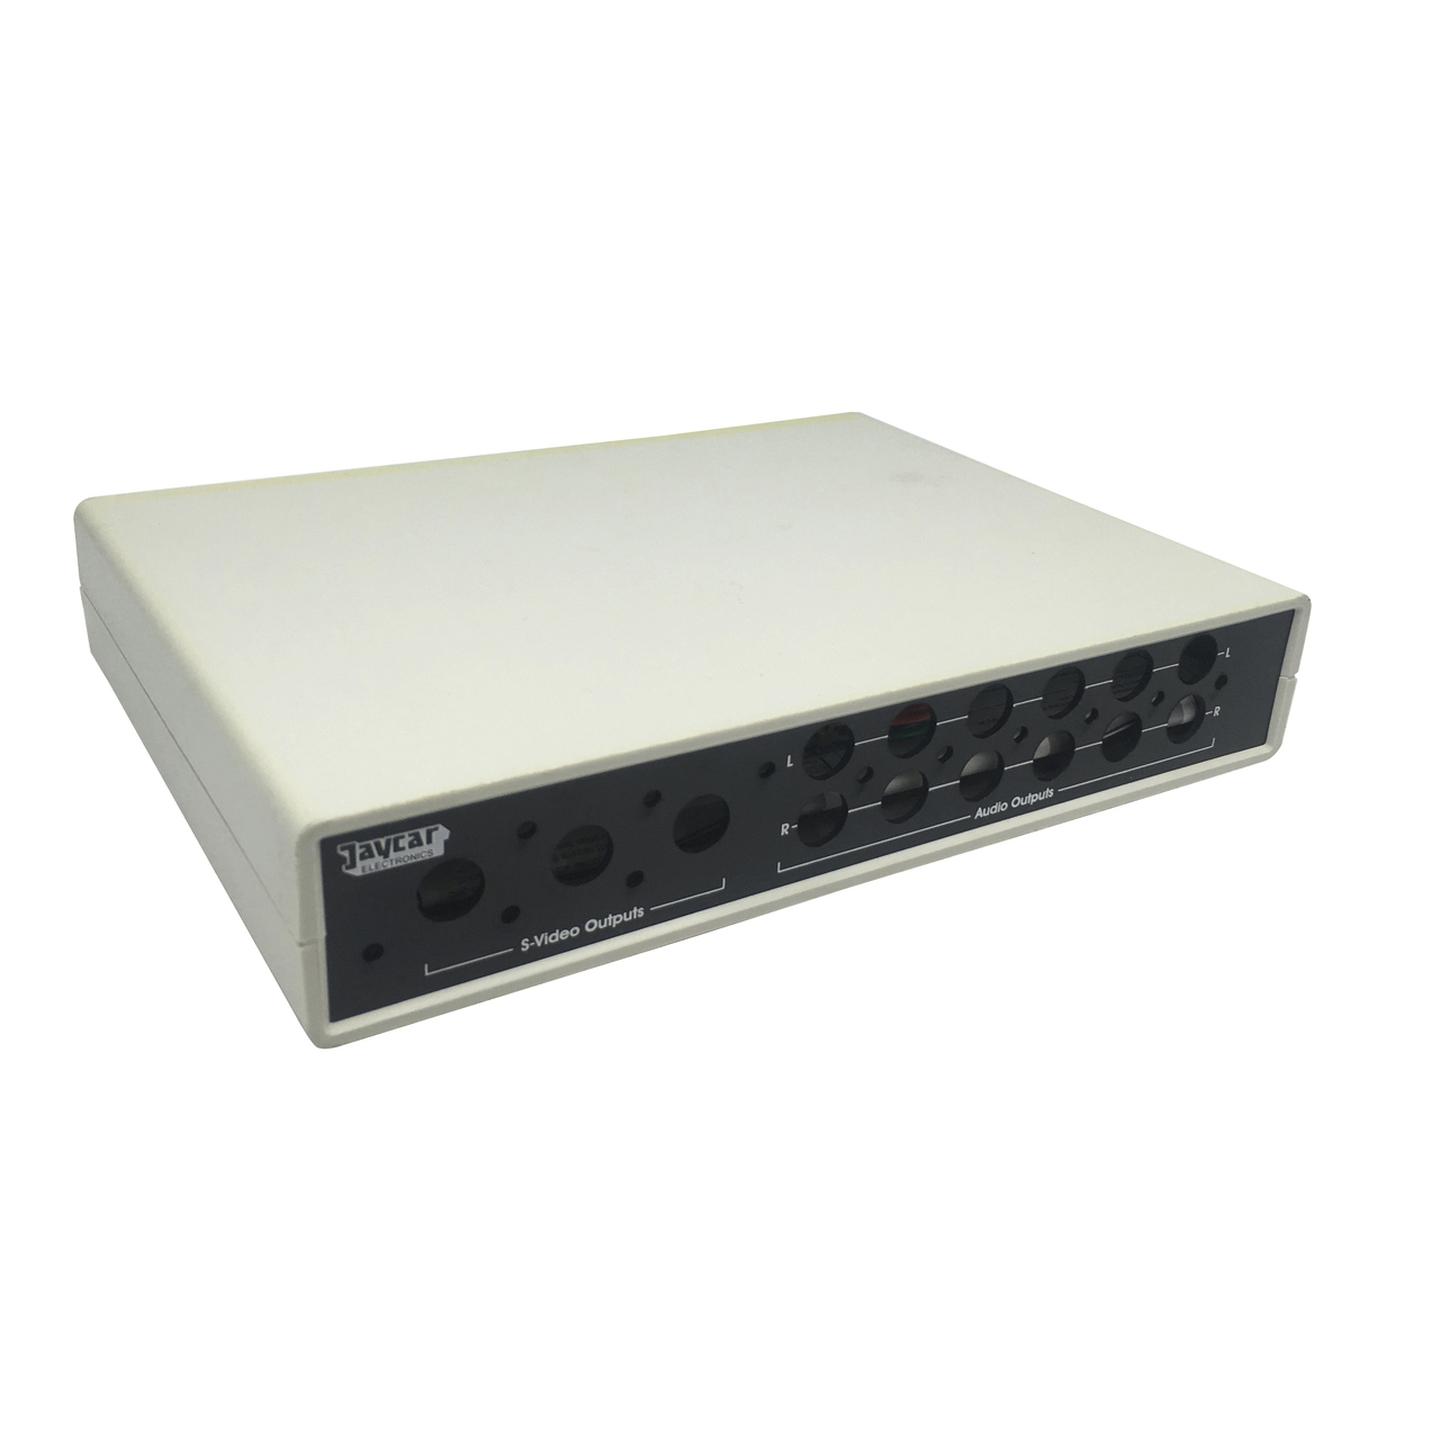 Low Cost S-Video/Audio Distribution Amplifier Kit Back Catalogue